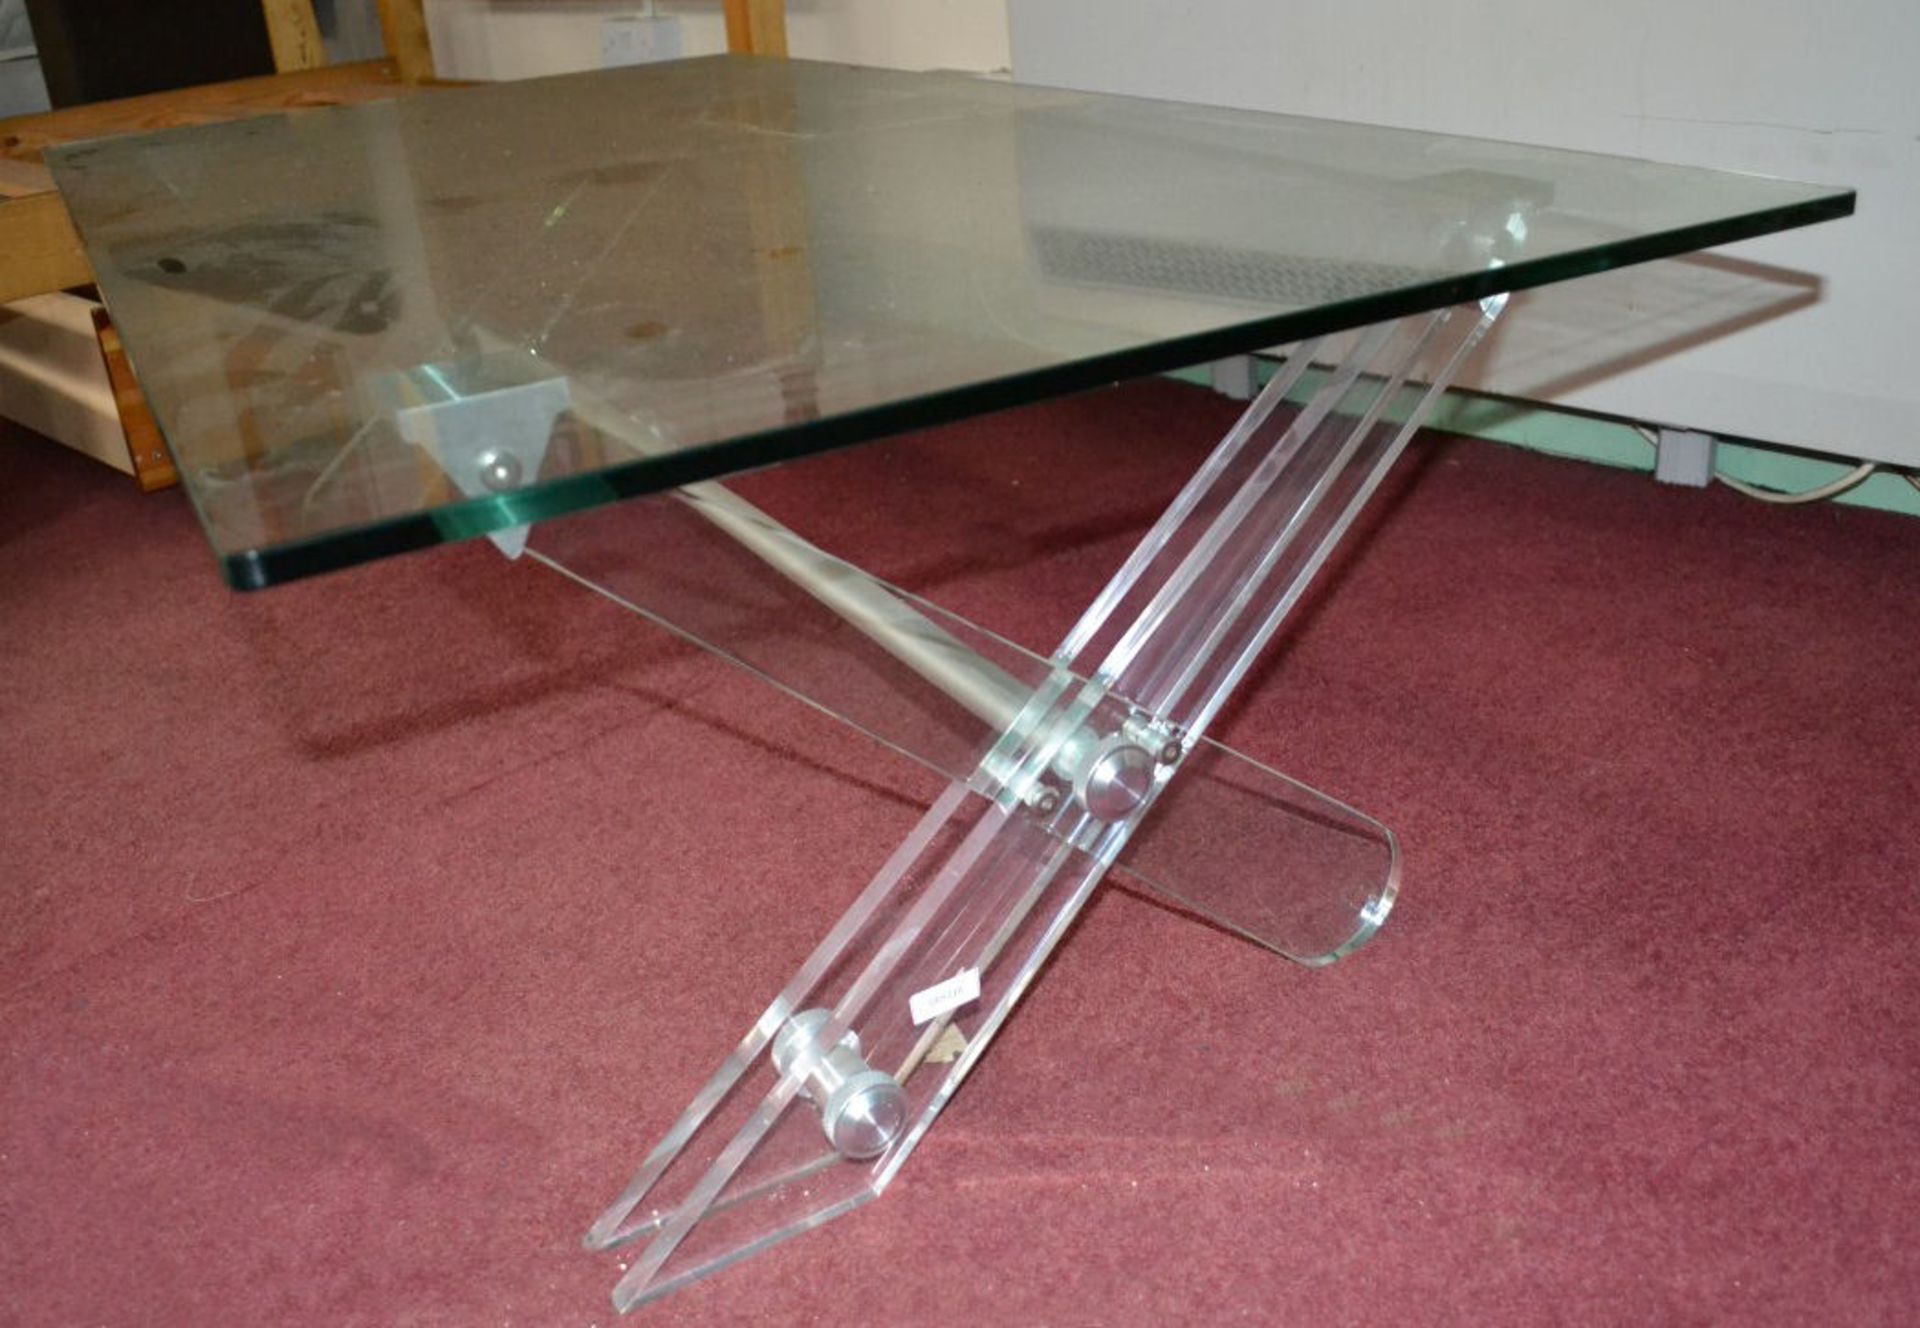 1 x Long Rectangular Glass Top Coffee Table in a Chelsom Style - Image 2 of 3